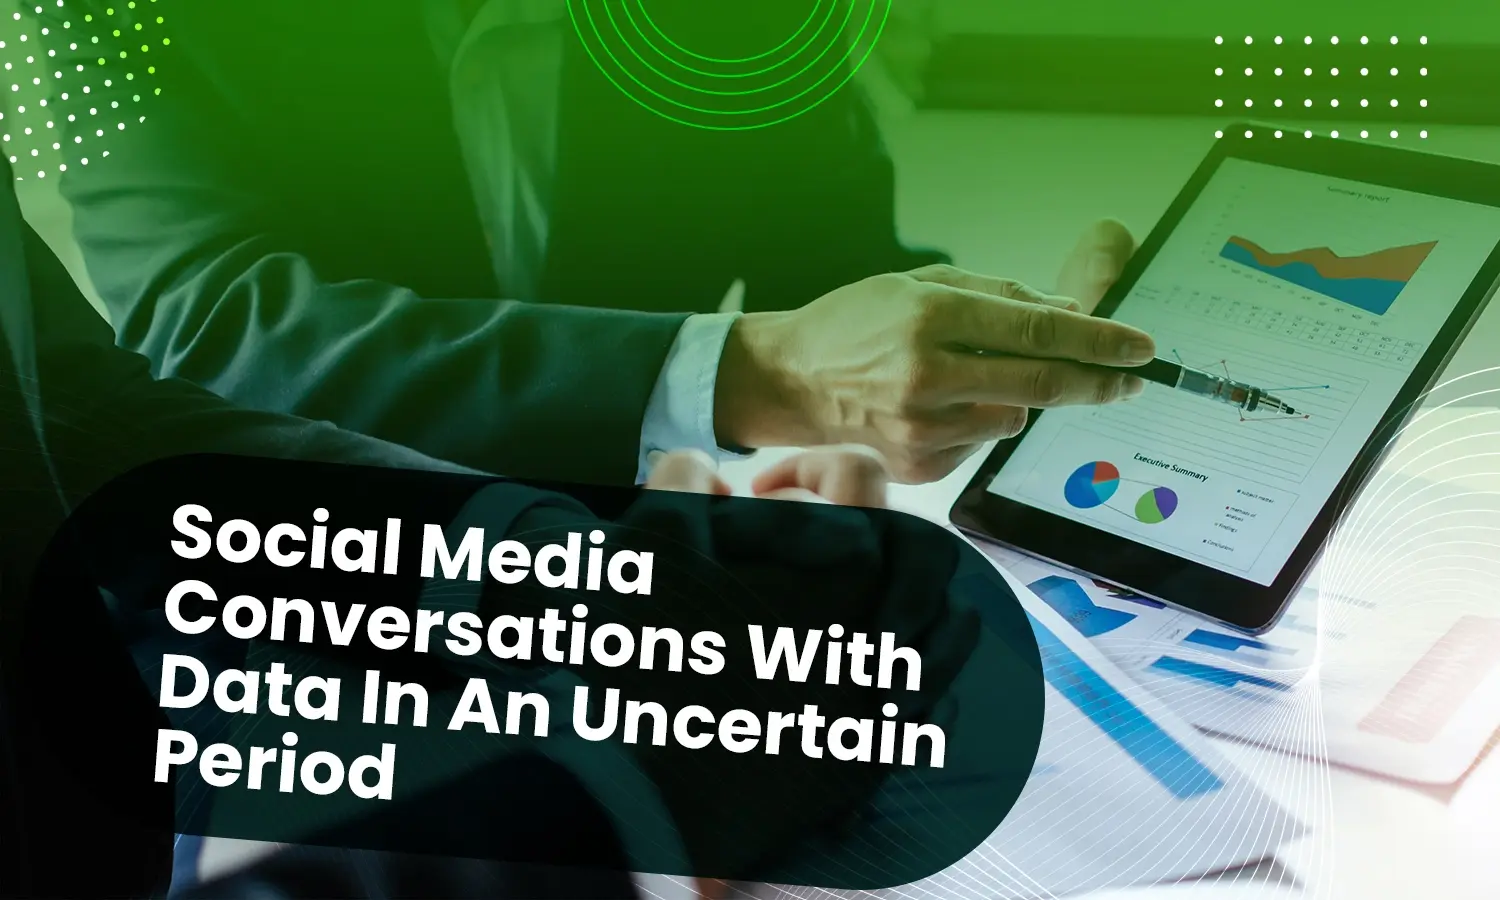 Making The Most Of Social Media Conversations With Data In An Uncertain Period